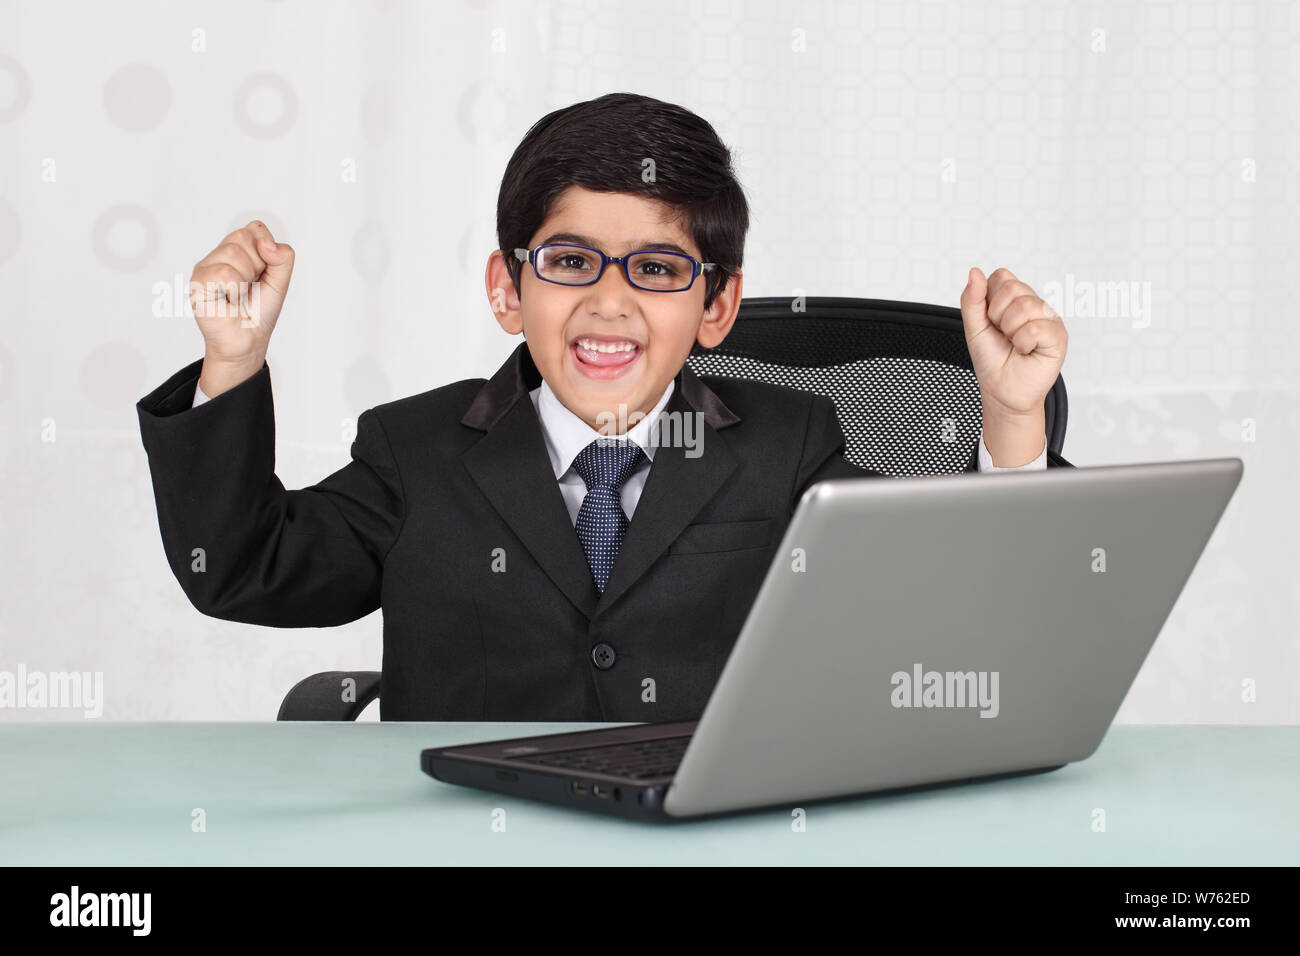 Boy pretending to be a businessman working on a laptop Stock Photo